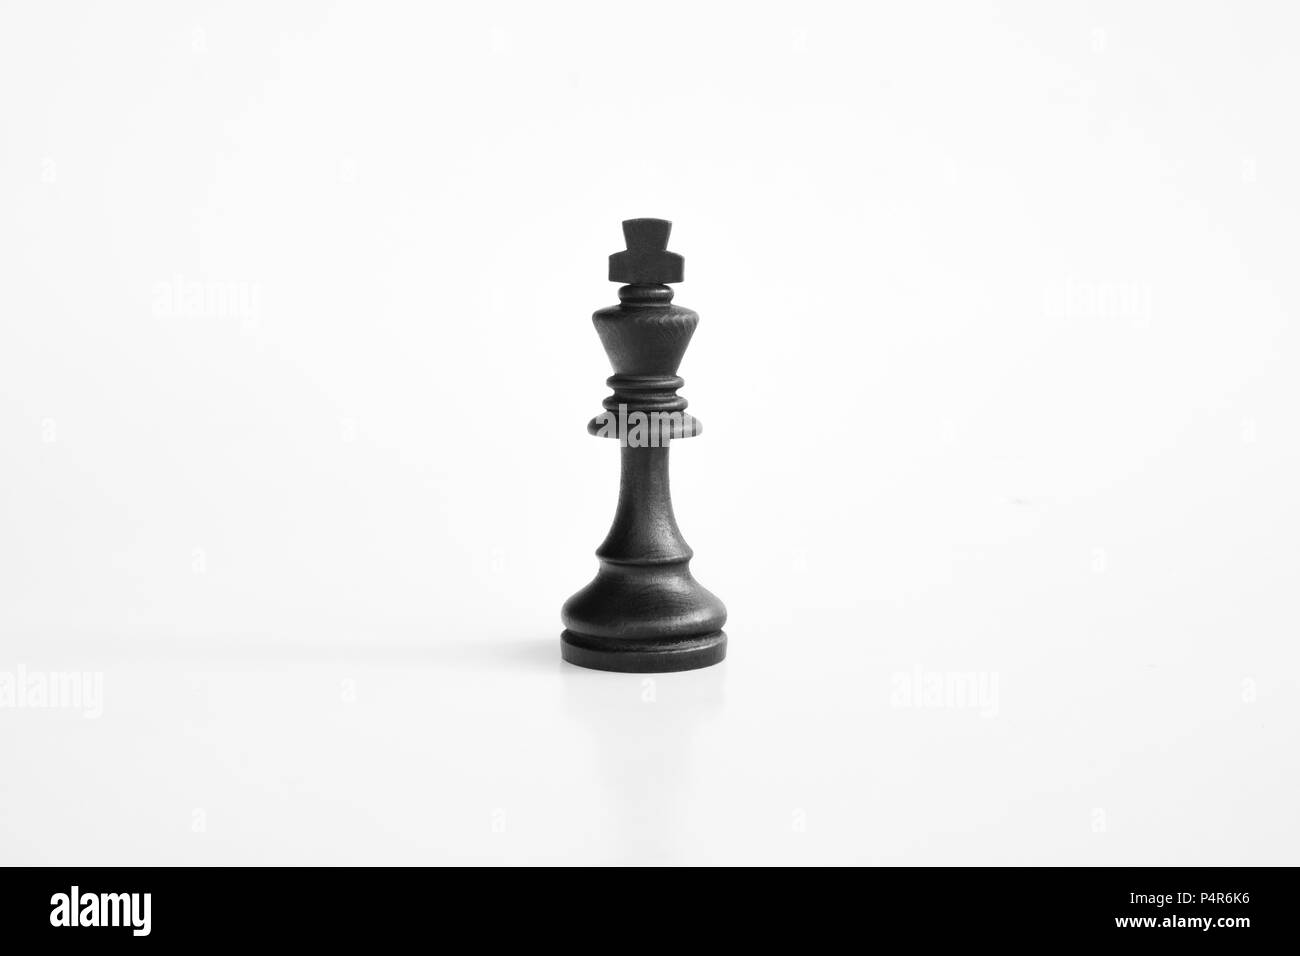 A Black Chess Game With Black Pieces Background Wallpaper Image